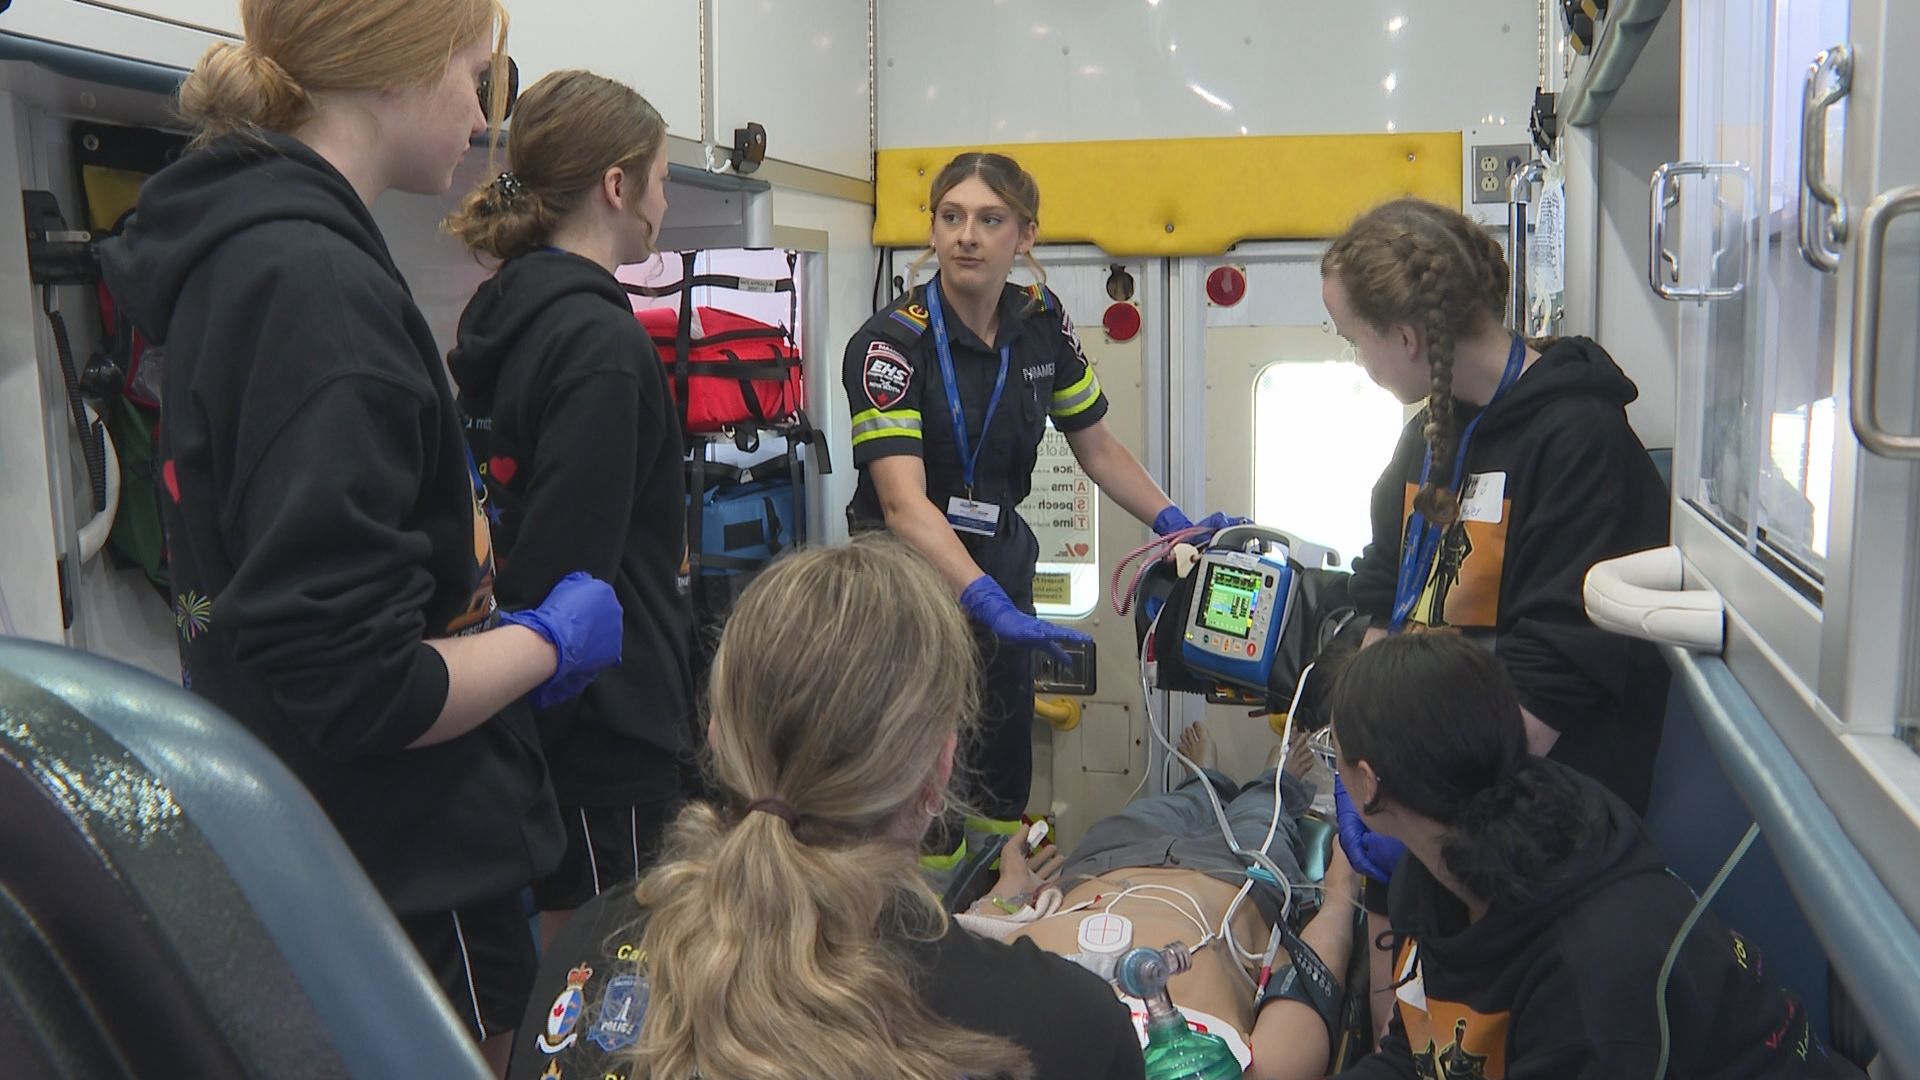 Camp Courage looks to empower next generation of first responders